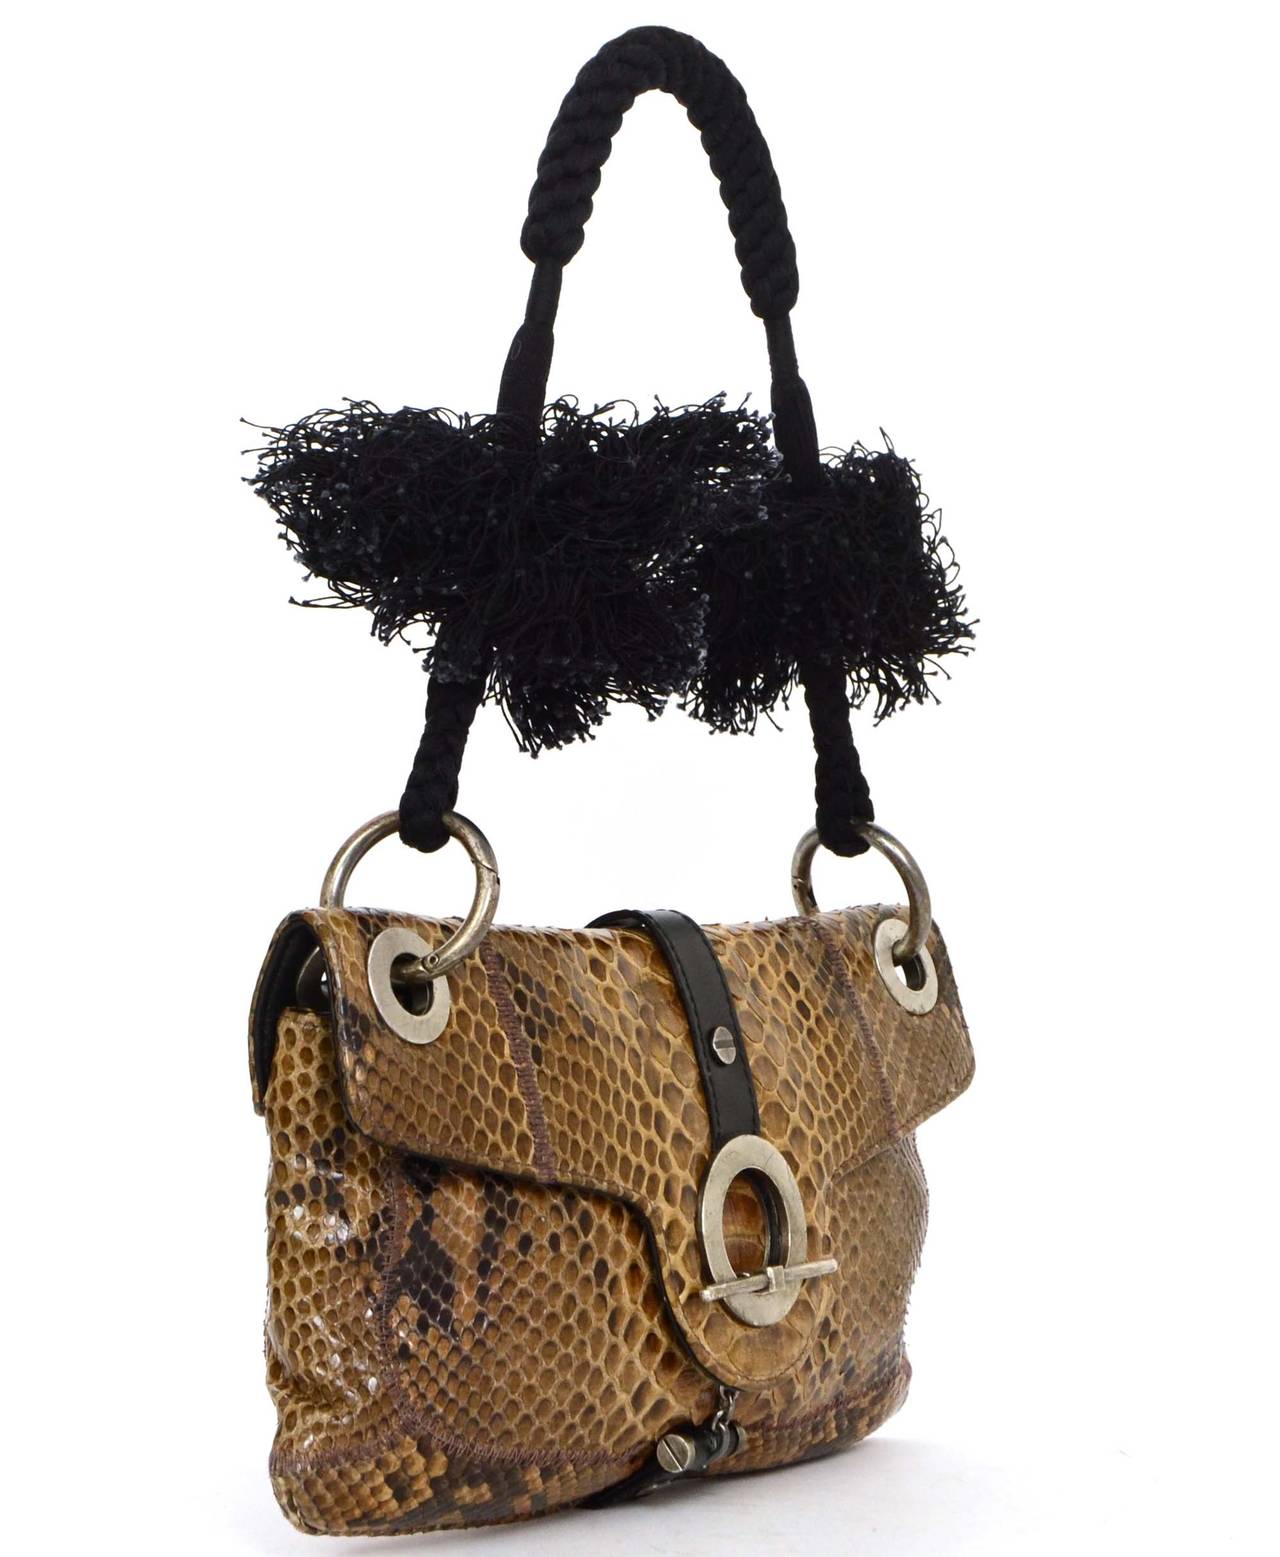 Lanvin Brown Snakeskin Shoulder Bag

Features detachable braided rope & tassel shoulder strap

Color: Brown, tan, black and silvertone
Hardware: Silvertone
Materials: Snakeskin, leather and metal
Lining: Black leather and fine